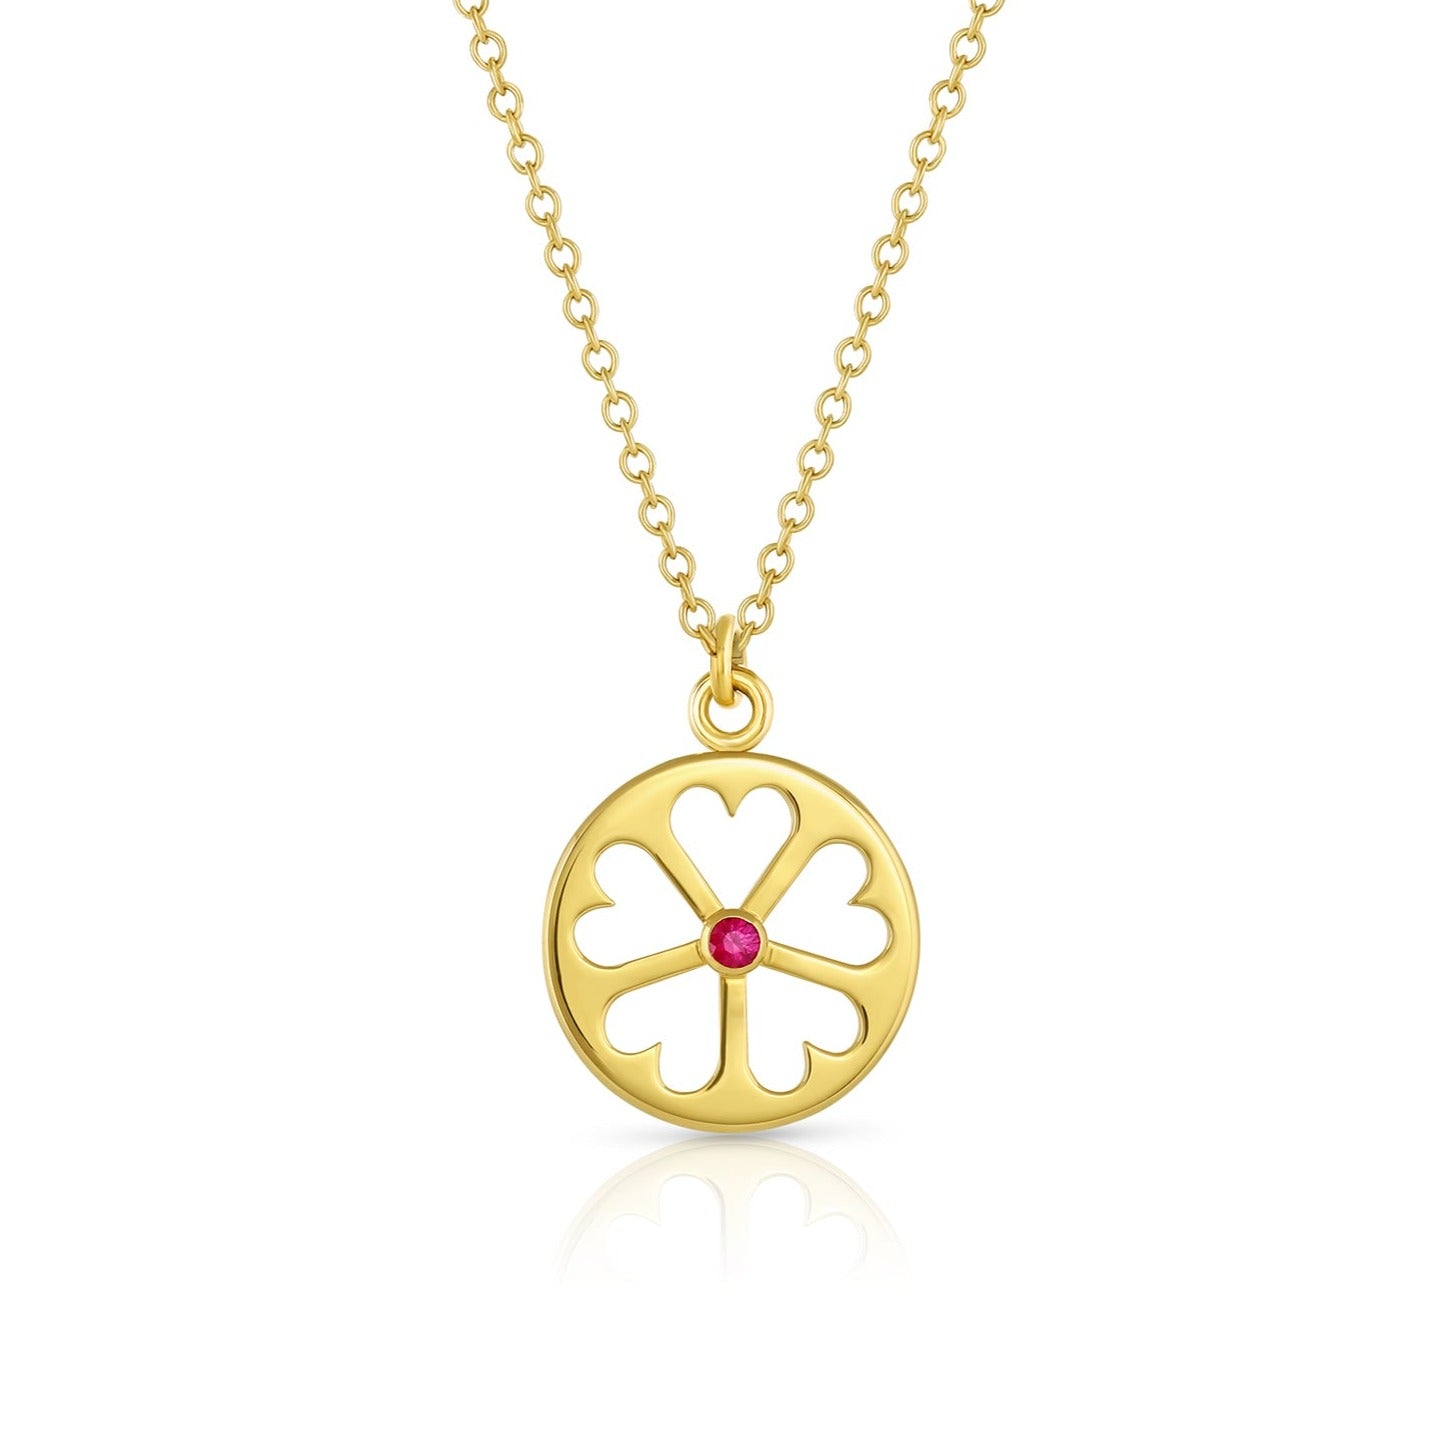 Load image into Gallery viewer, 18k yellow gold circle pendant on chain with heart cut outs and ruby center stone on white background.
